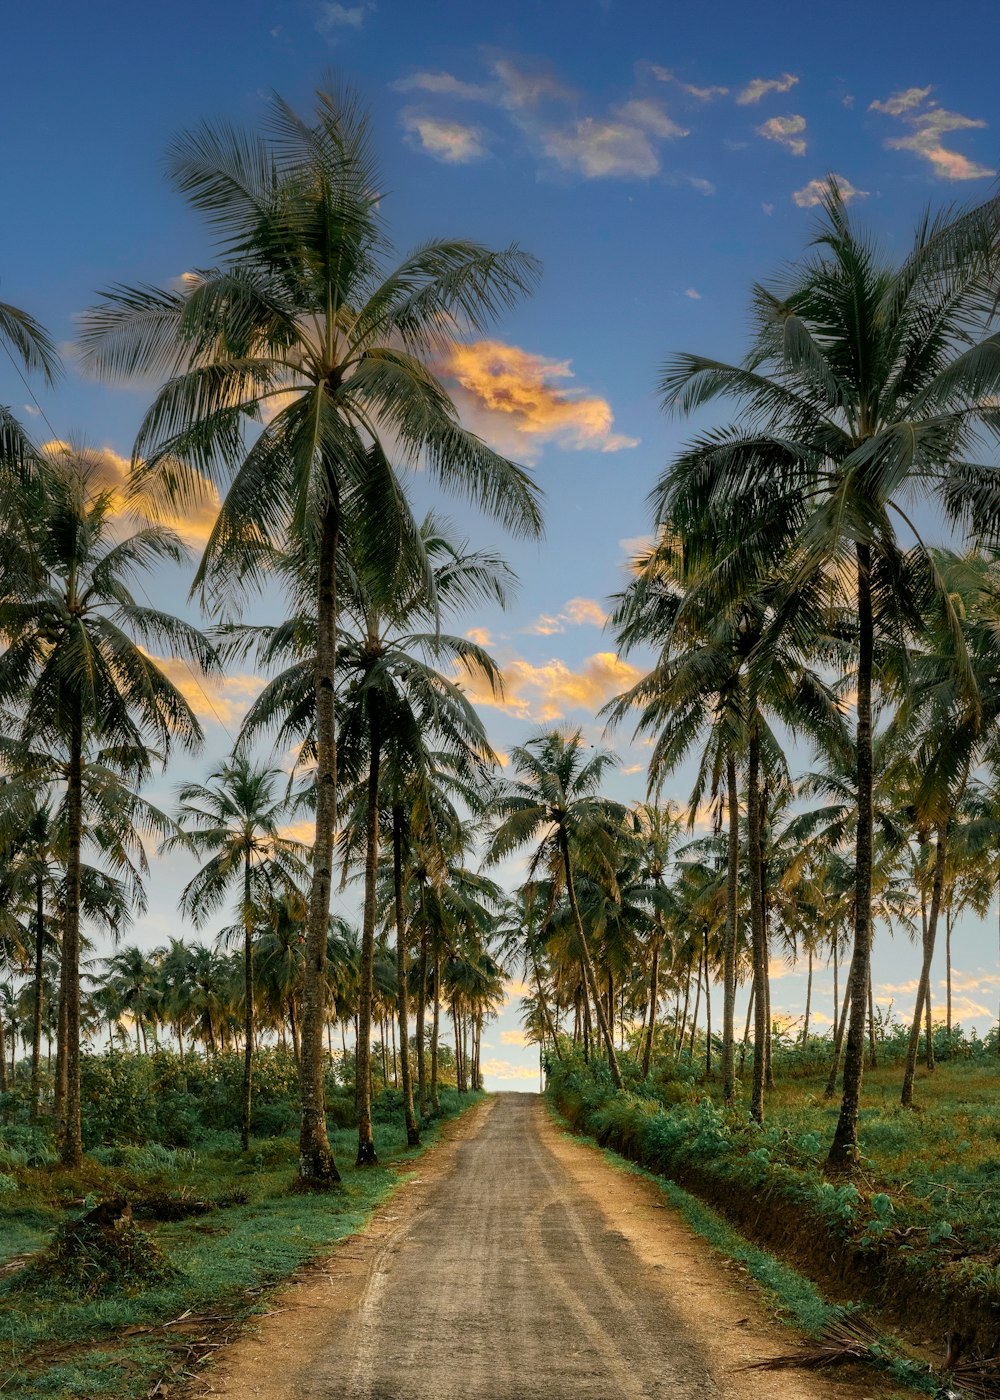 a dirt road surrounded by palm trees under a blue sky